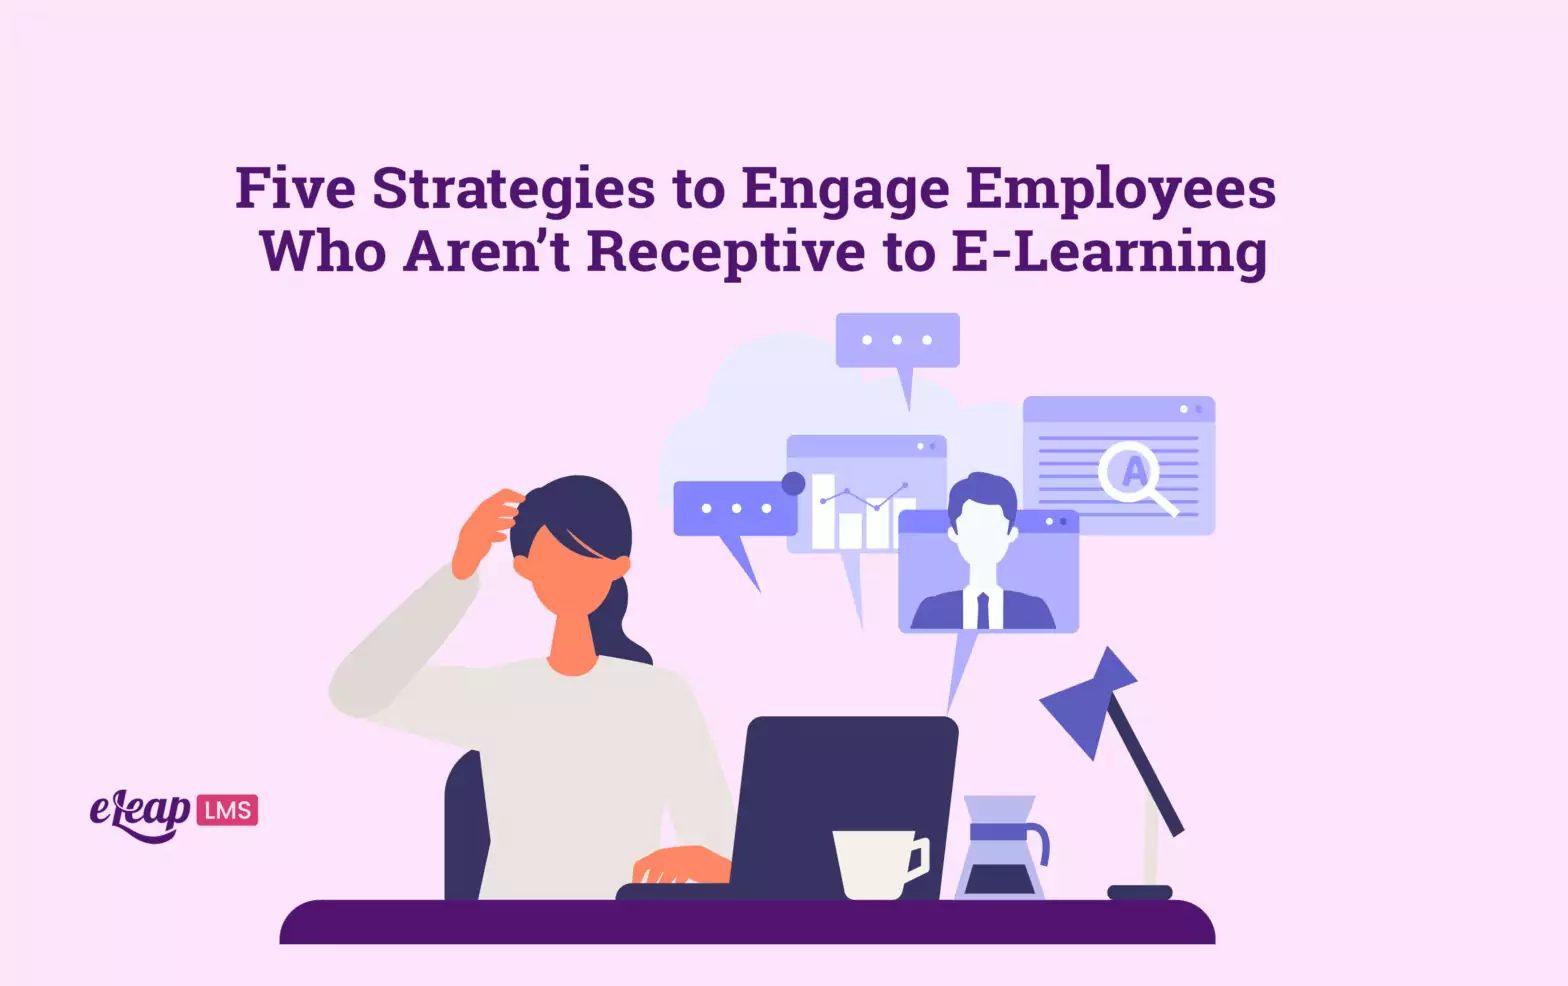 Five Strategies to Engage Employees Who Aren’t Receptive to E-Learning